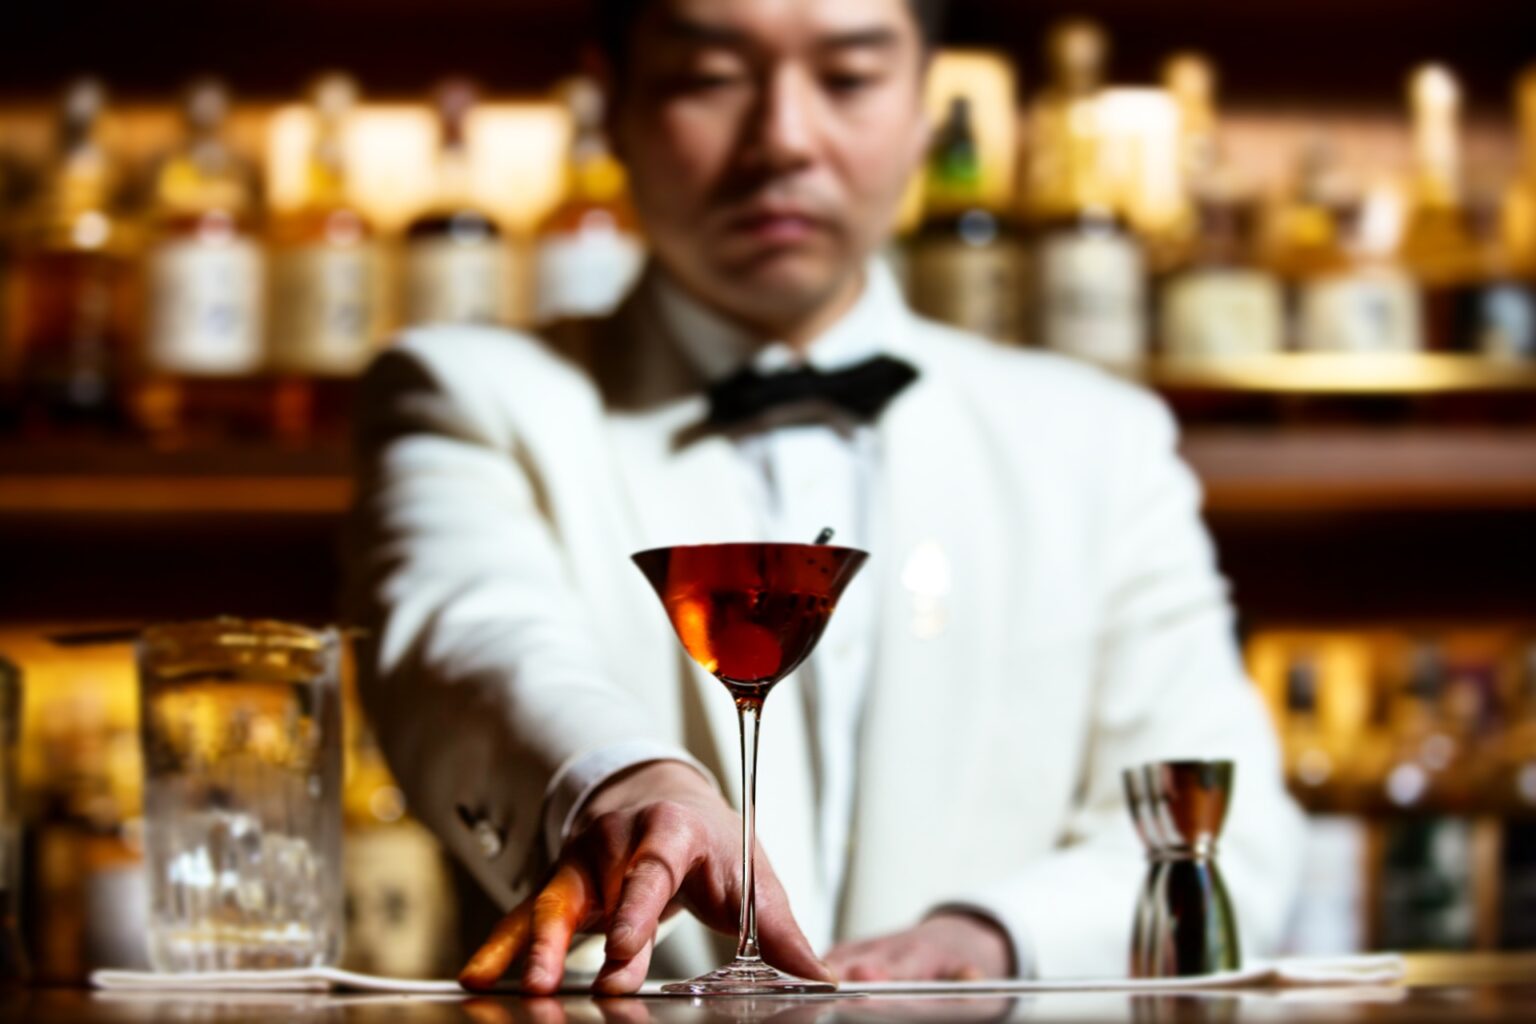 A bartender serving a drink in a cocktail glass. There are shelves of bottles behind him, as well as glasses and jigger on the counter on either side of the drink he's serving.